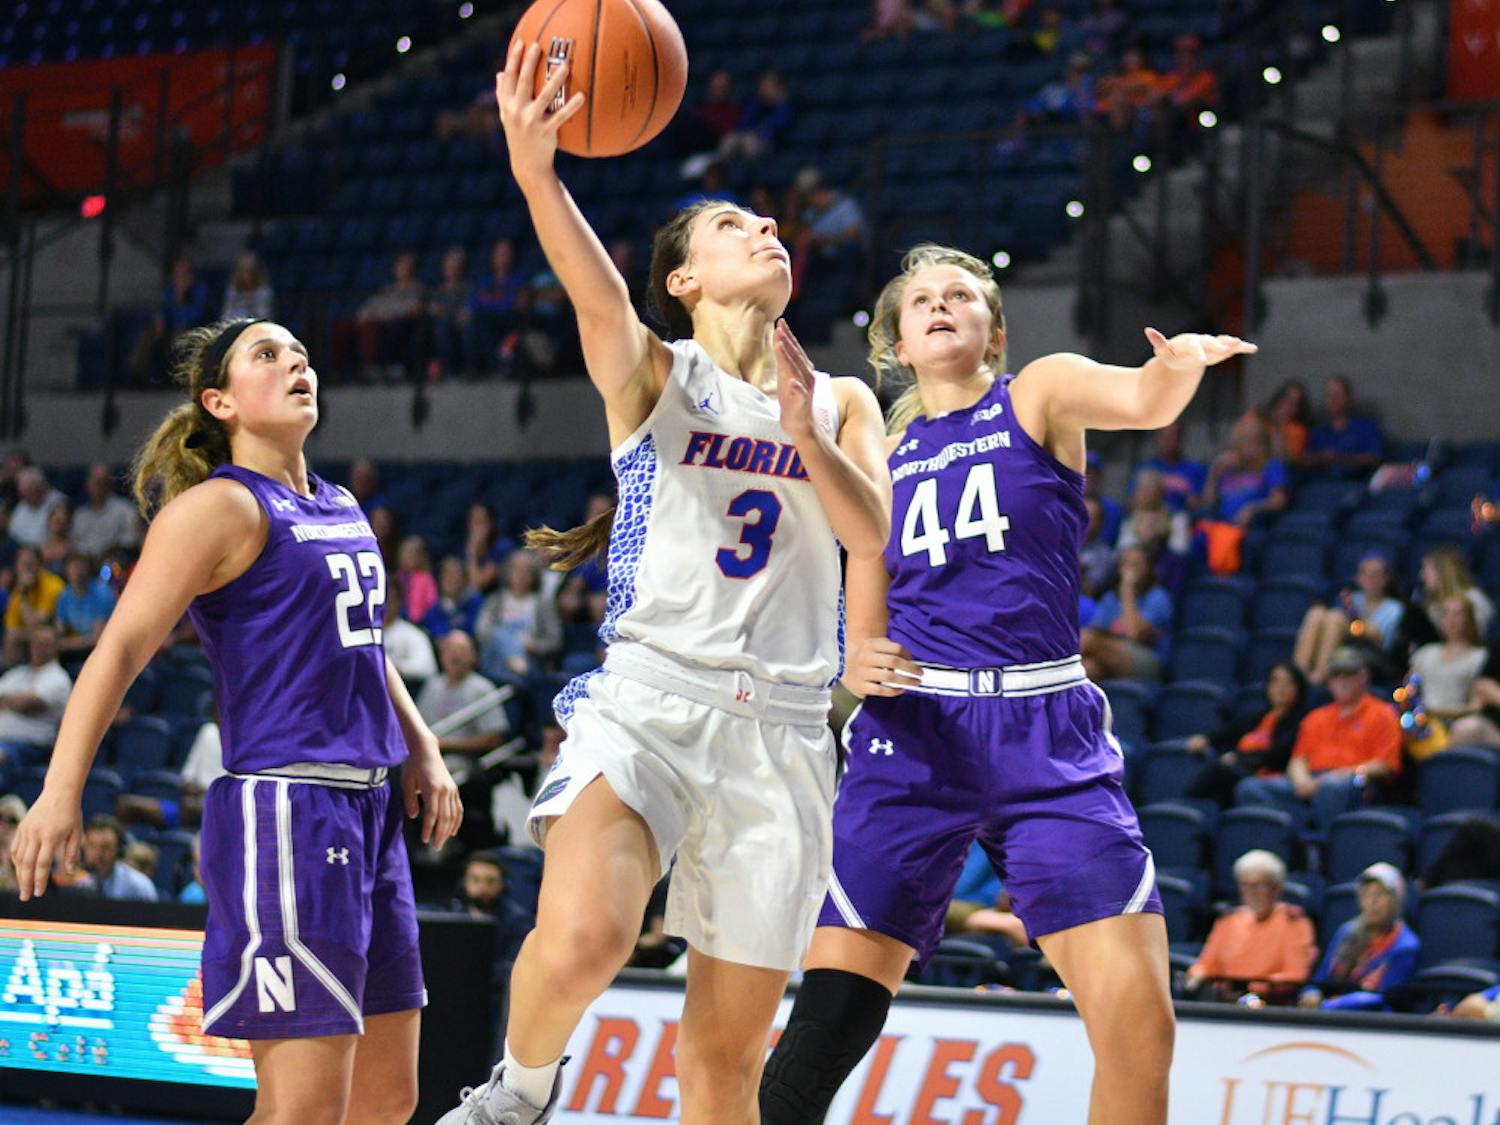 Guard Funda Nakkasoglu is the SEC's second-leading scorer, and she contributed a team-high 16 points as well as two rebounds and a steal in the Gators 56-53 loss to UNLV.